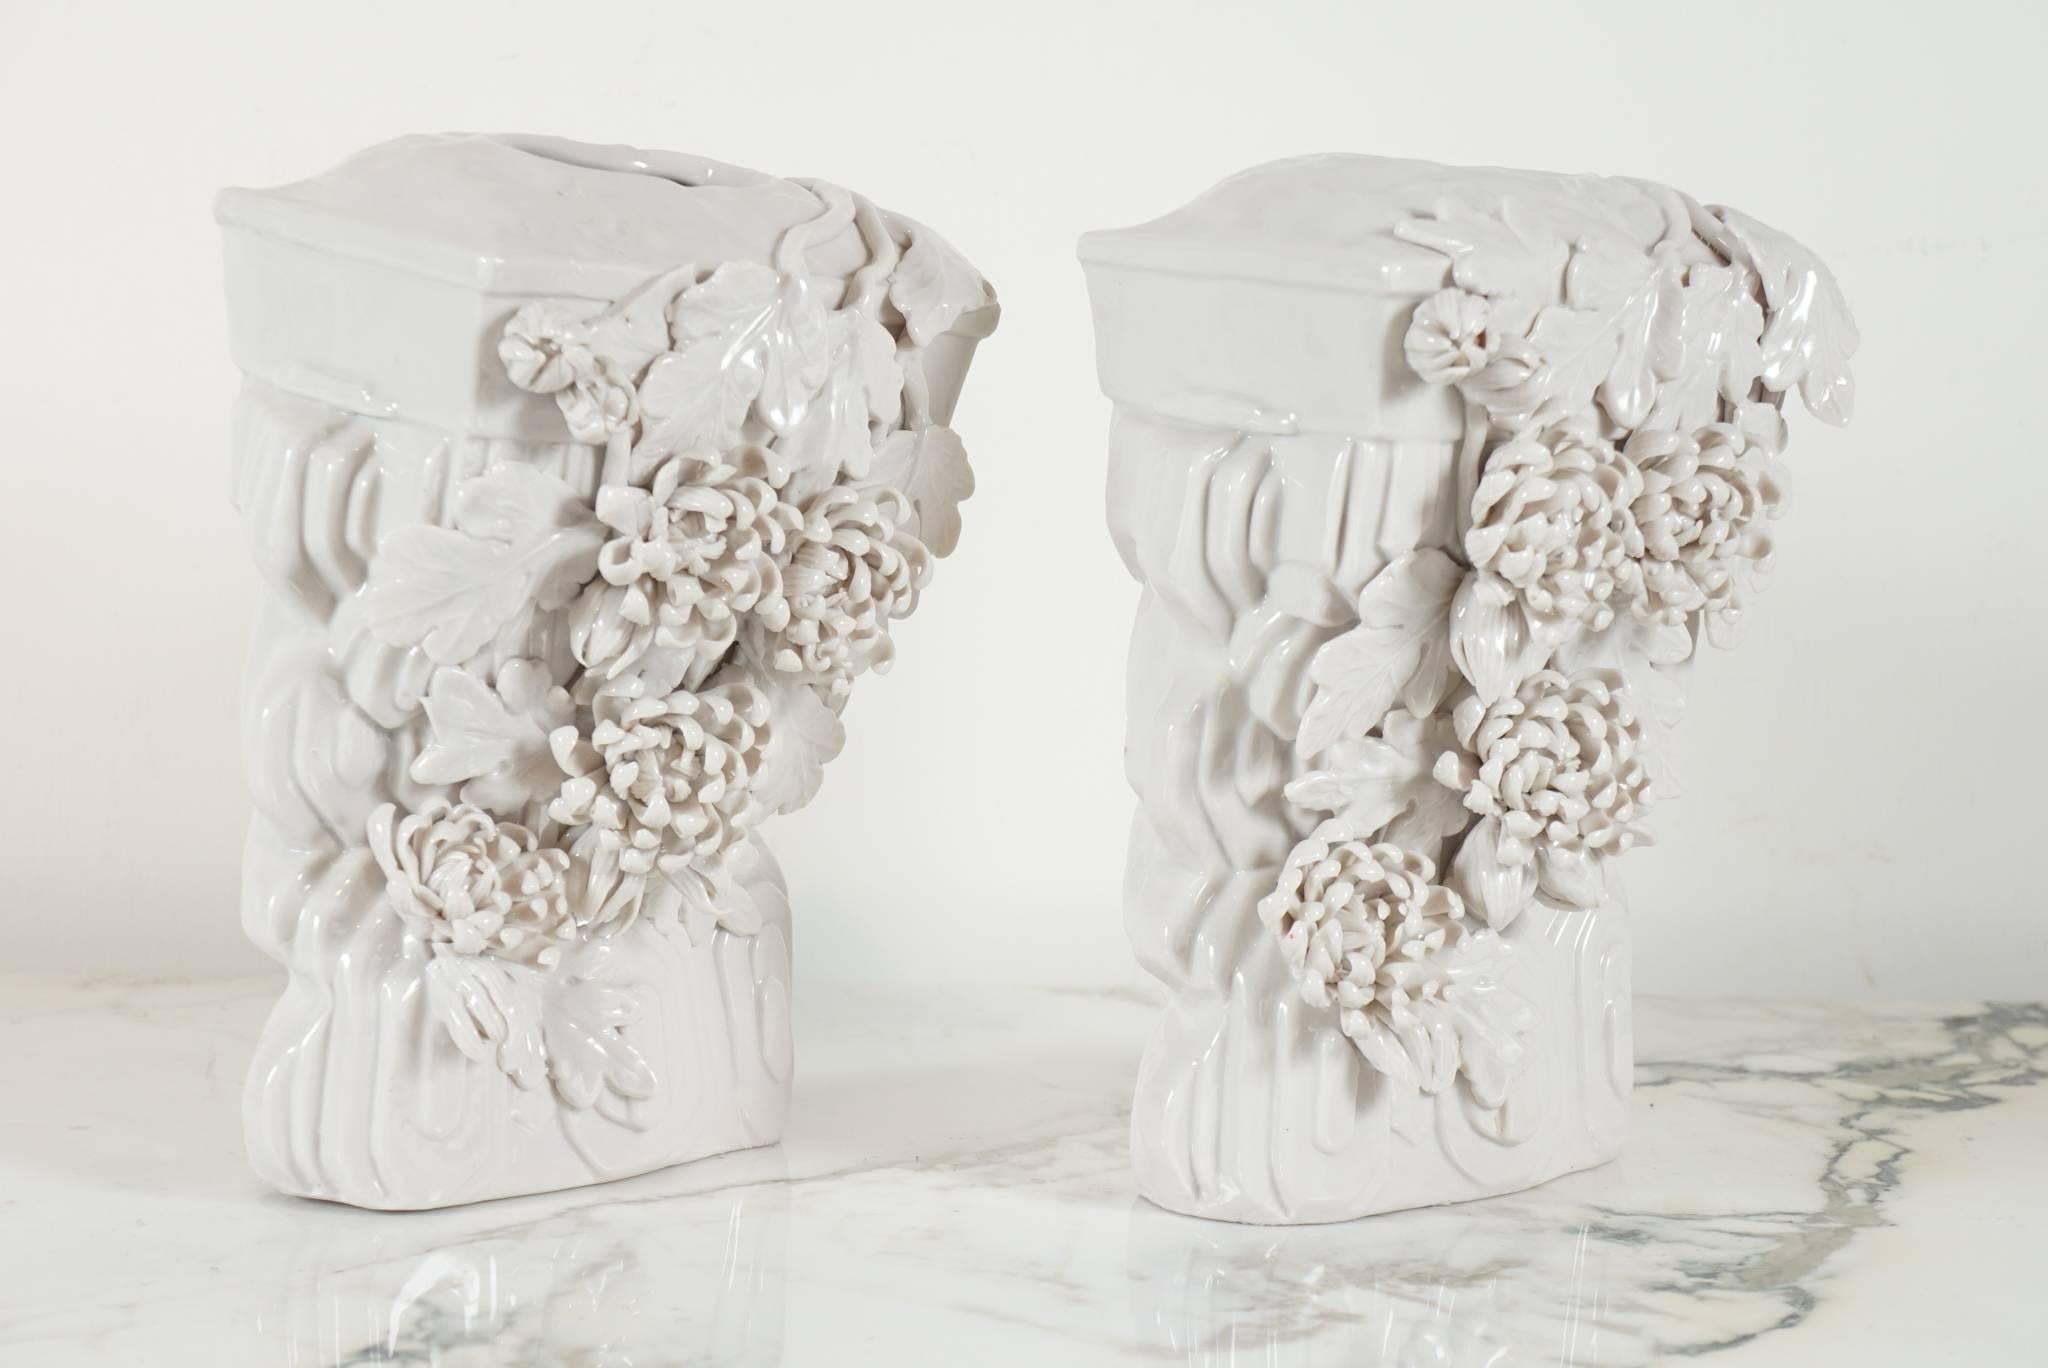 Here is a beautiful pair of blanc de chine vases that are also wall brackets.
The pieces are intricately detailed with flowers and leaves and architectural detail in an Art Deco style. The vases have full surround detail with more embellishment on